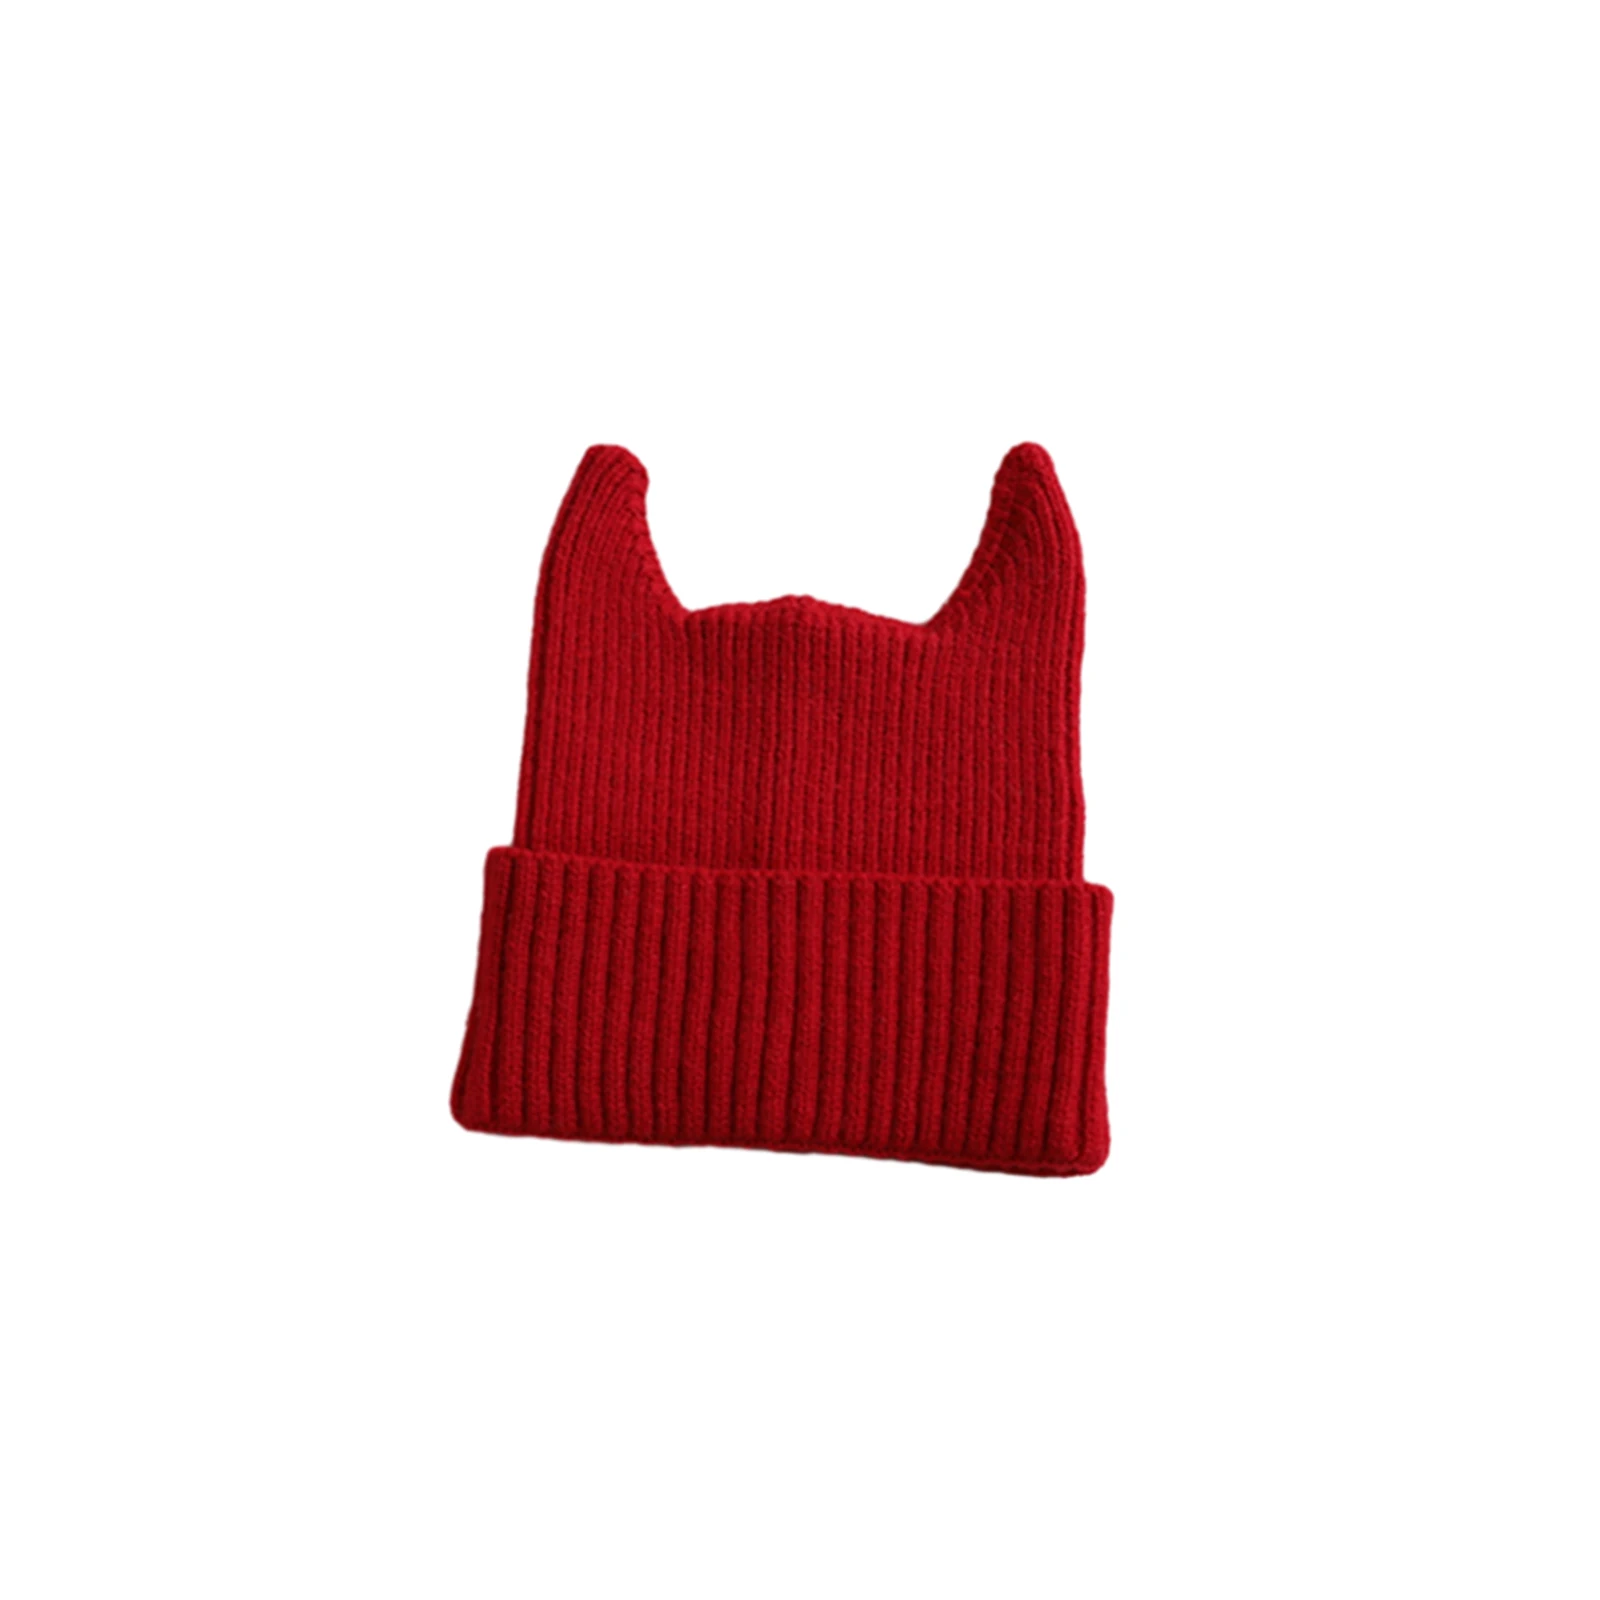 BeQeuewll Kids Boys Girls Knit Hat with Horns Cute Soft Solid Color Beanie Warm Winter Cap for Girls Boys For 1-6 Years